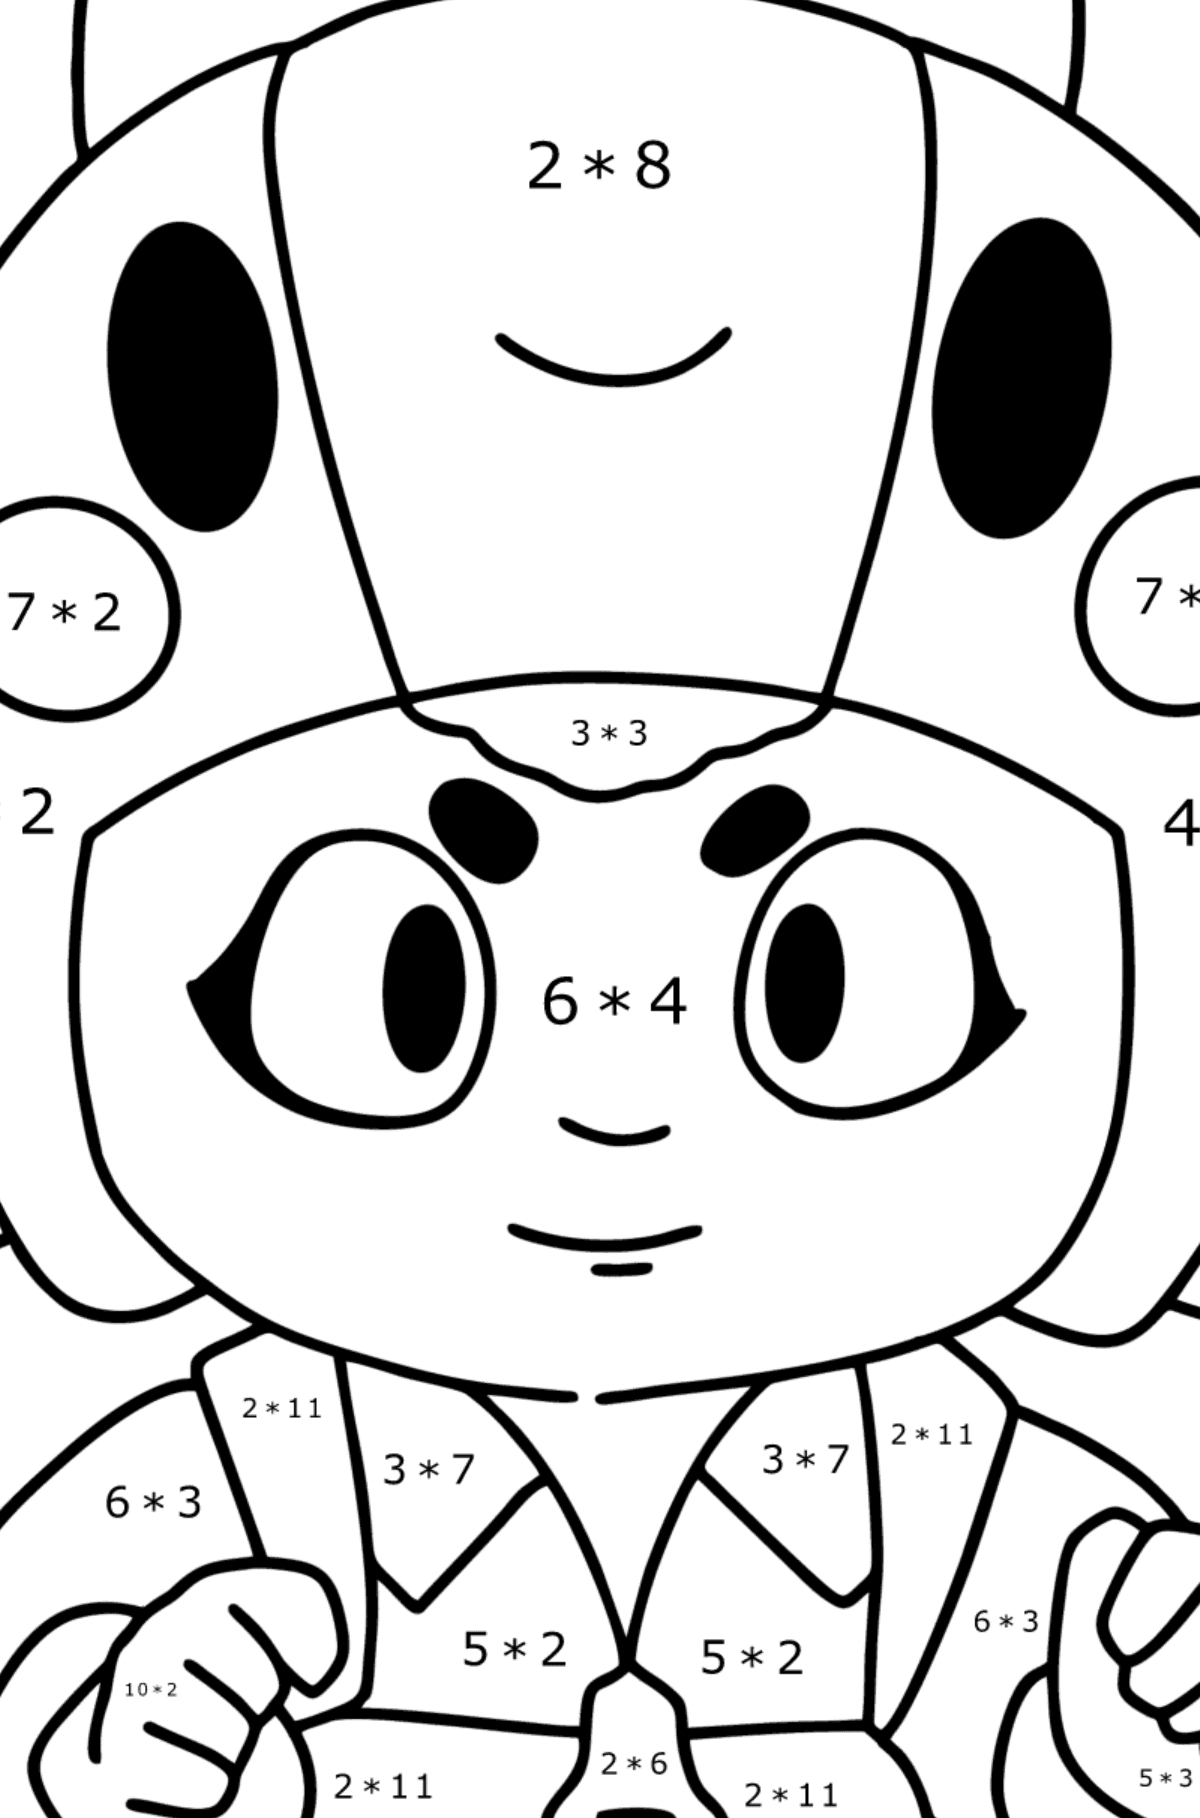 Brawl Stars Bea coloring page - Math Coloring - Multiplication for Kids